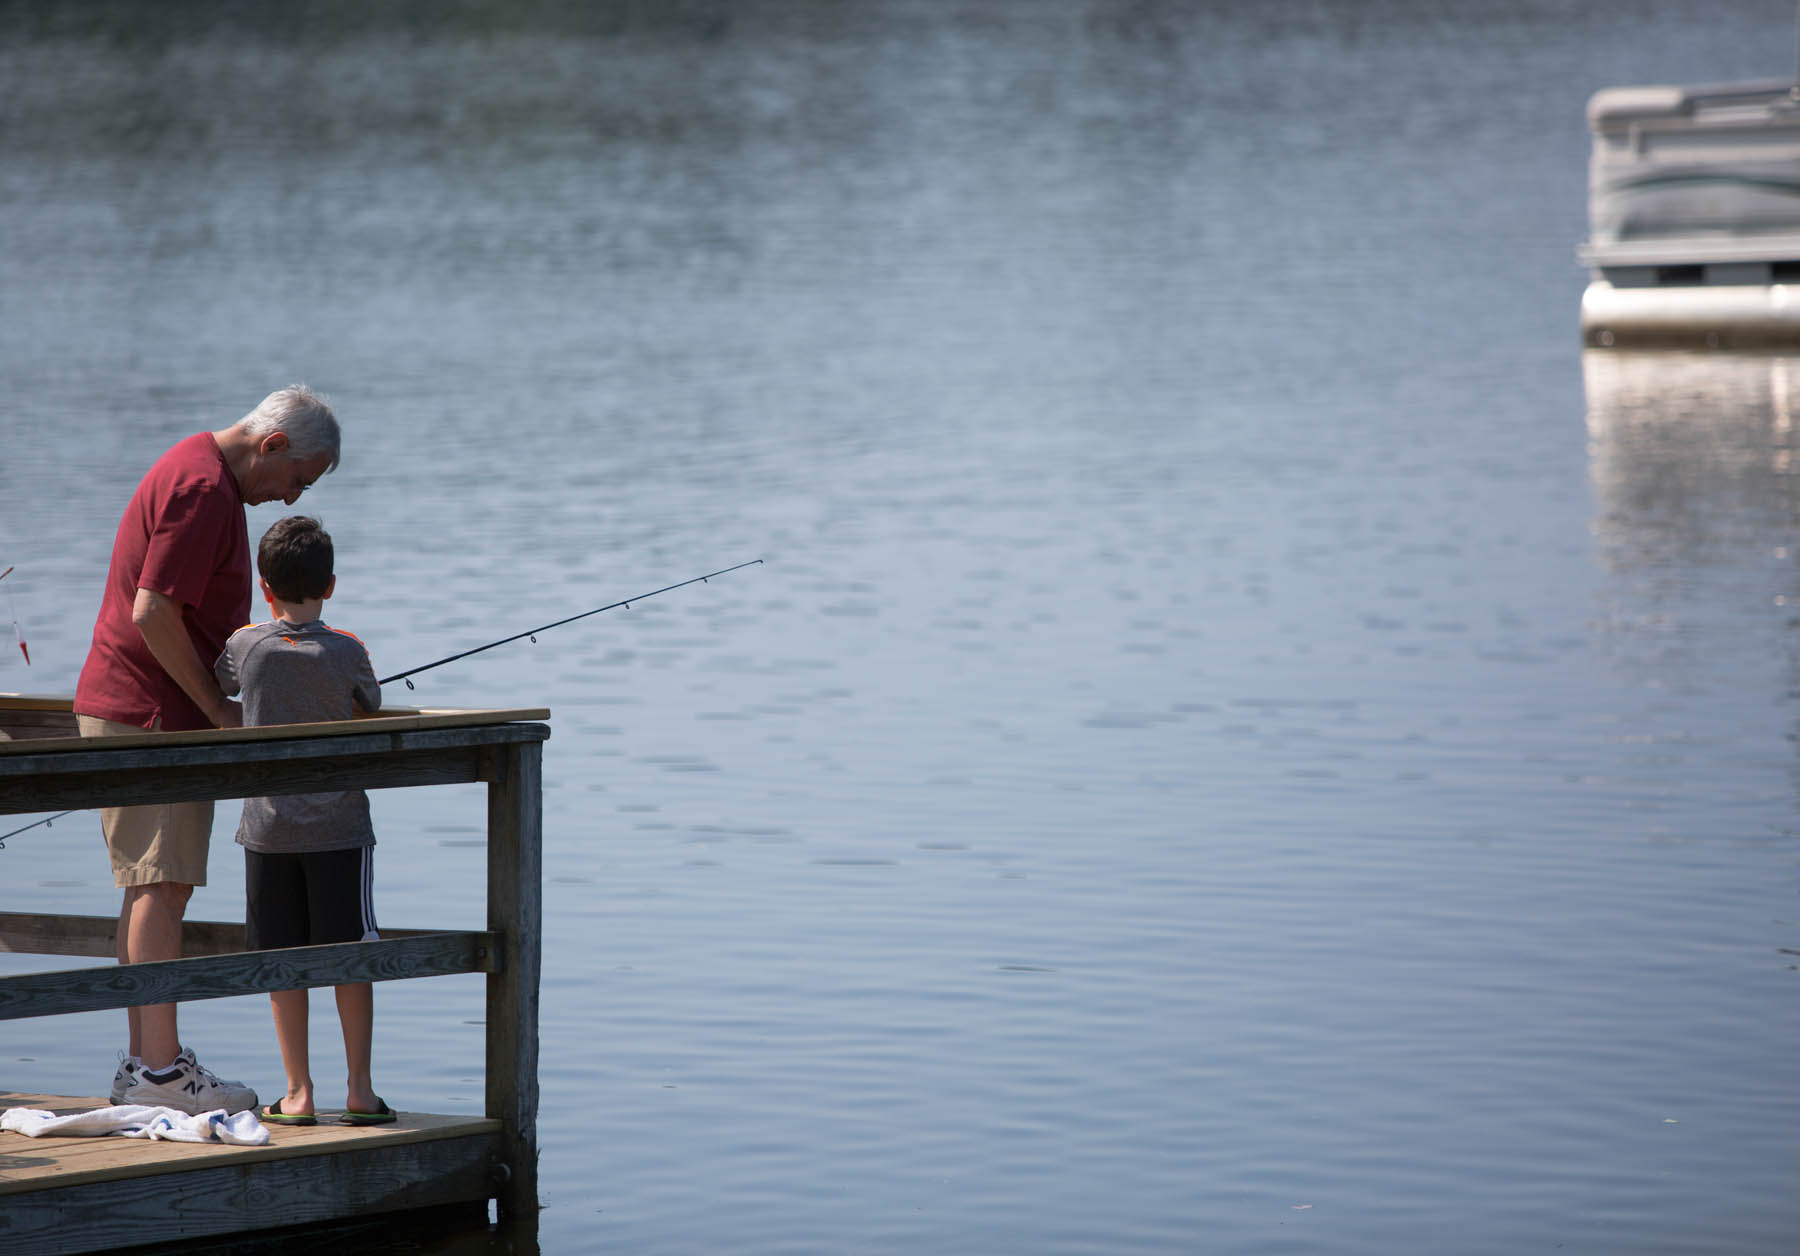 Grandparent and young boy fishing off a pier.